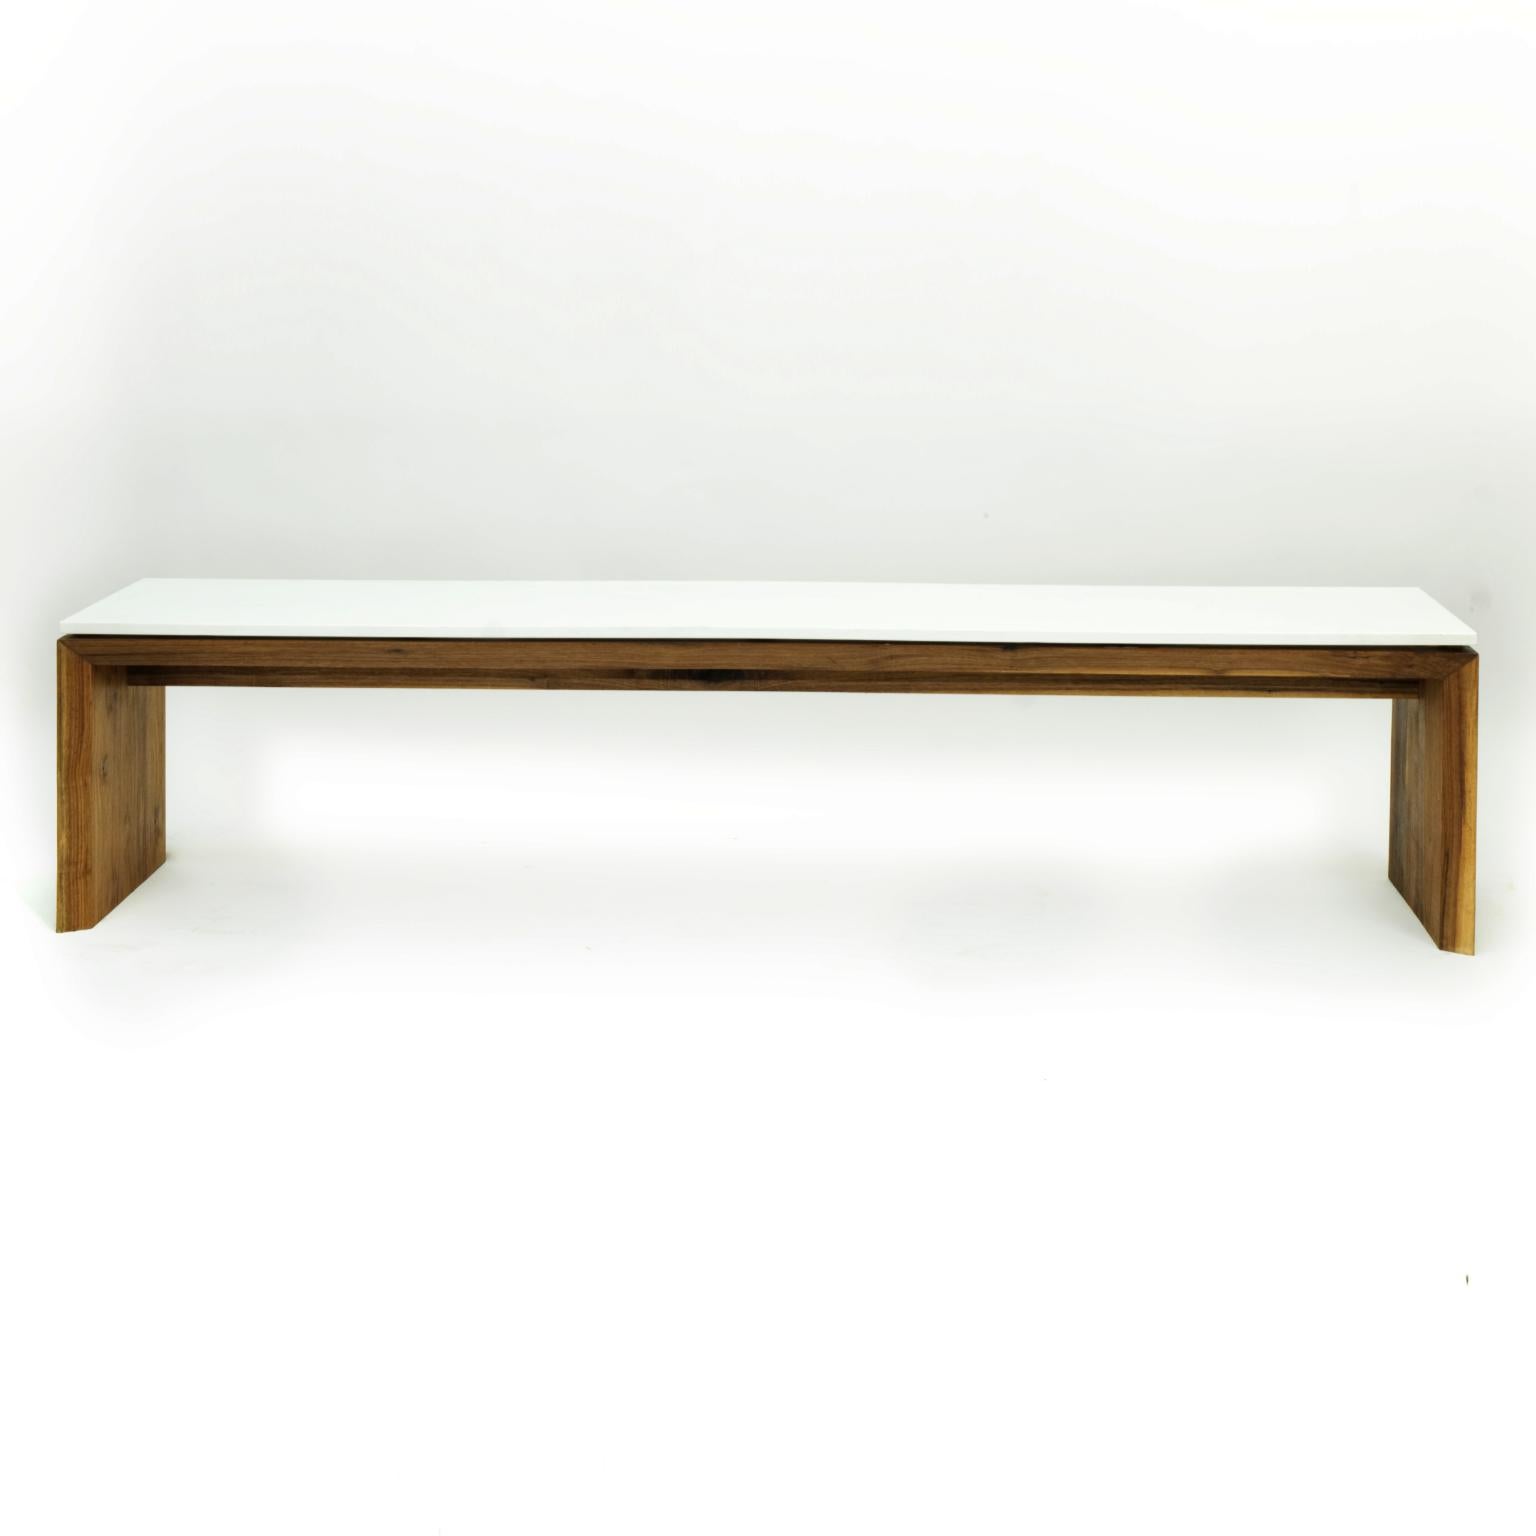 This bench is composed of a Corian top floating on an elegantly detailed walnut frame. It is large enough for one's imagination or a group conversation. Spanning 7' long, it commands environments while subtly disappearing like its double miter